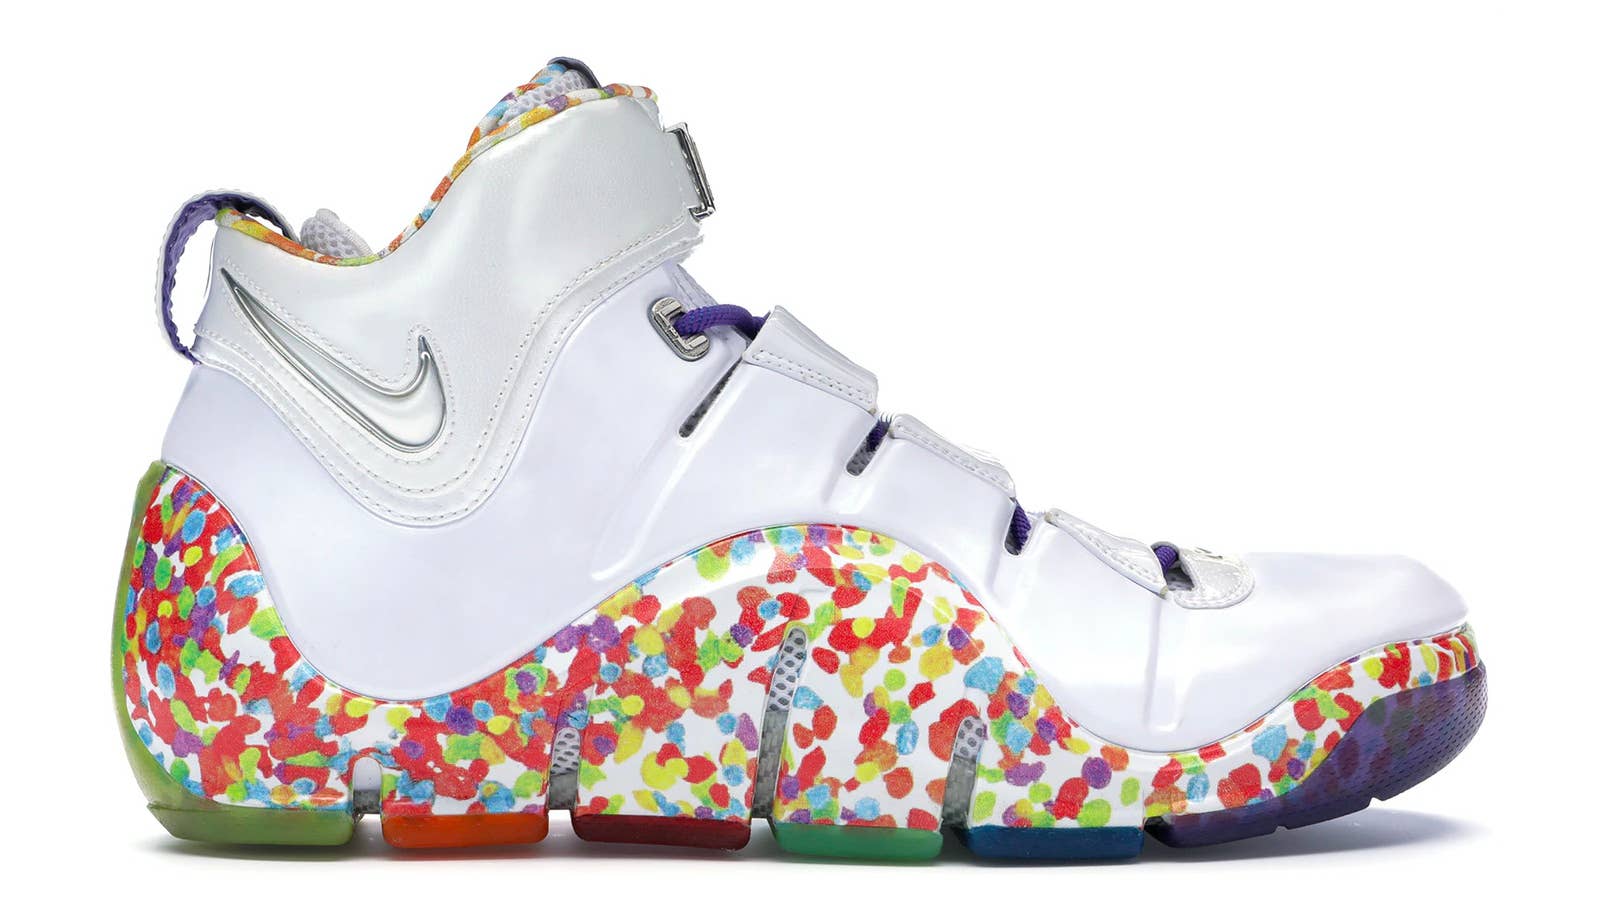 The Nike LeBron 4 Returns in the 'Fruity Pebbles' Colorway This Year ...